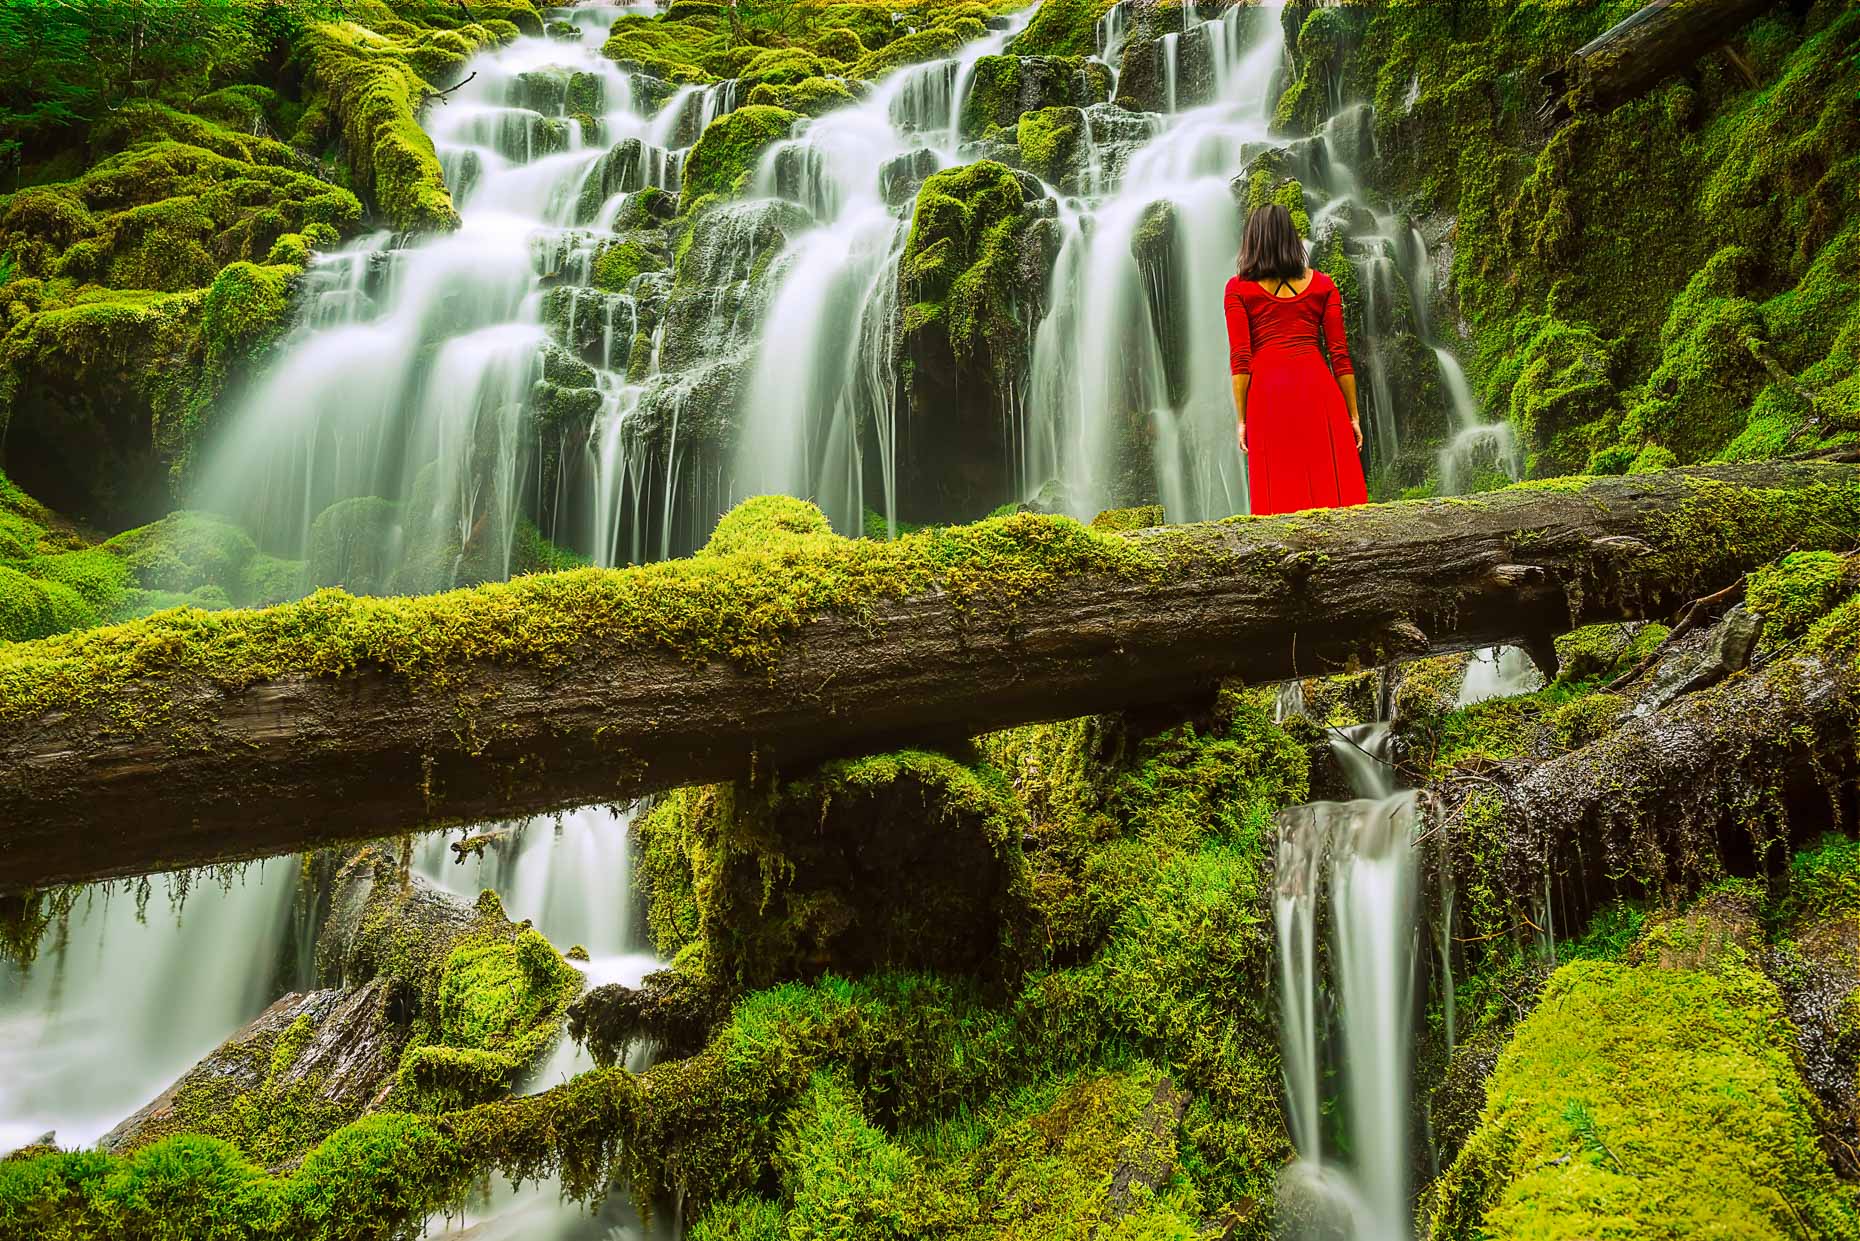 Lady in Red, Proxy Falls